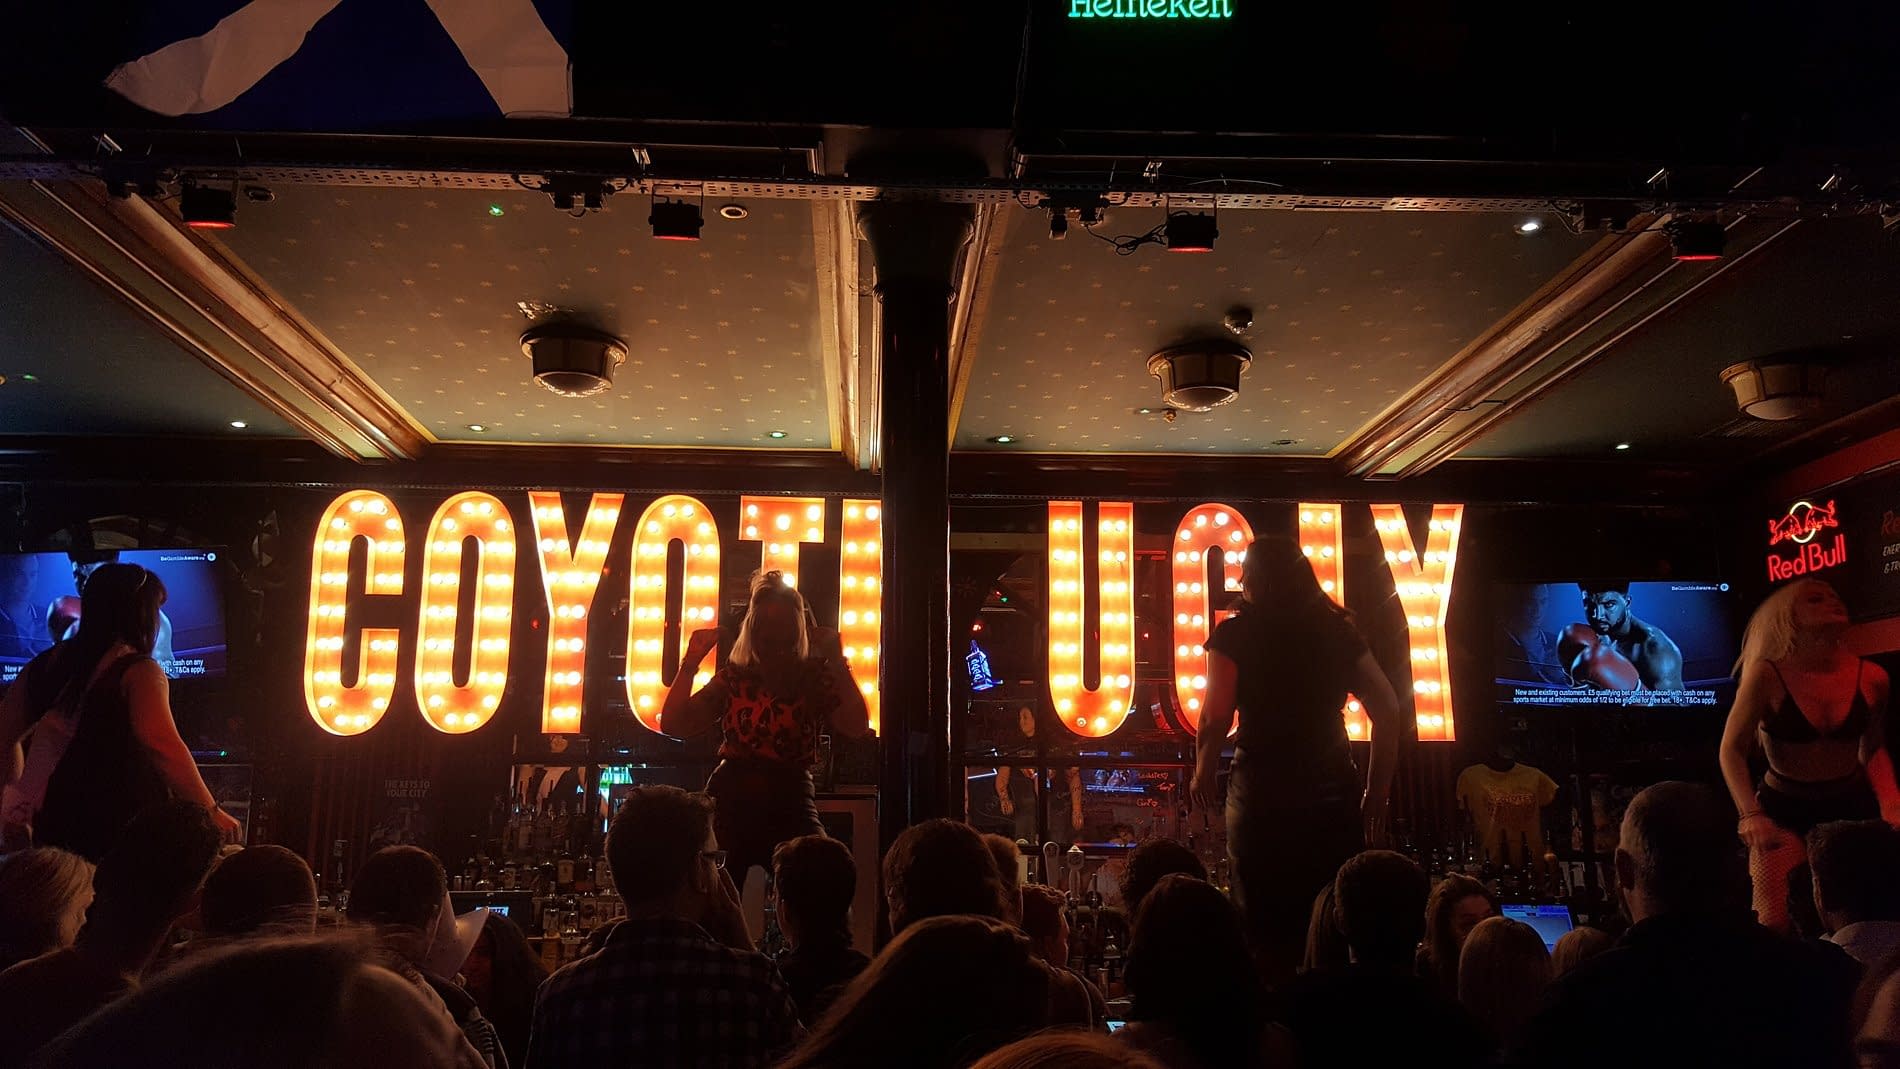 Stag Parties welcome at Coyote Ugly Cardiff